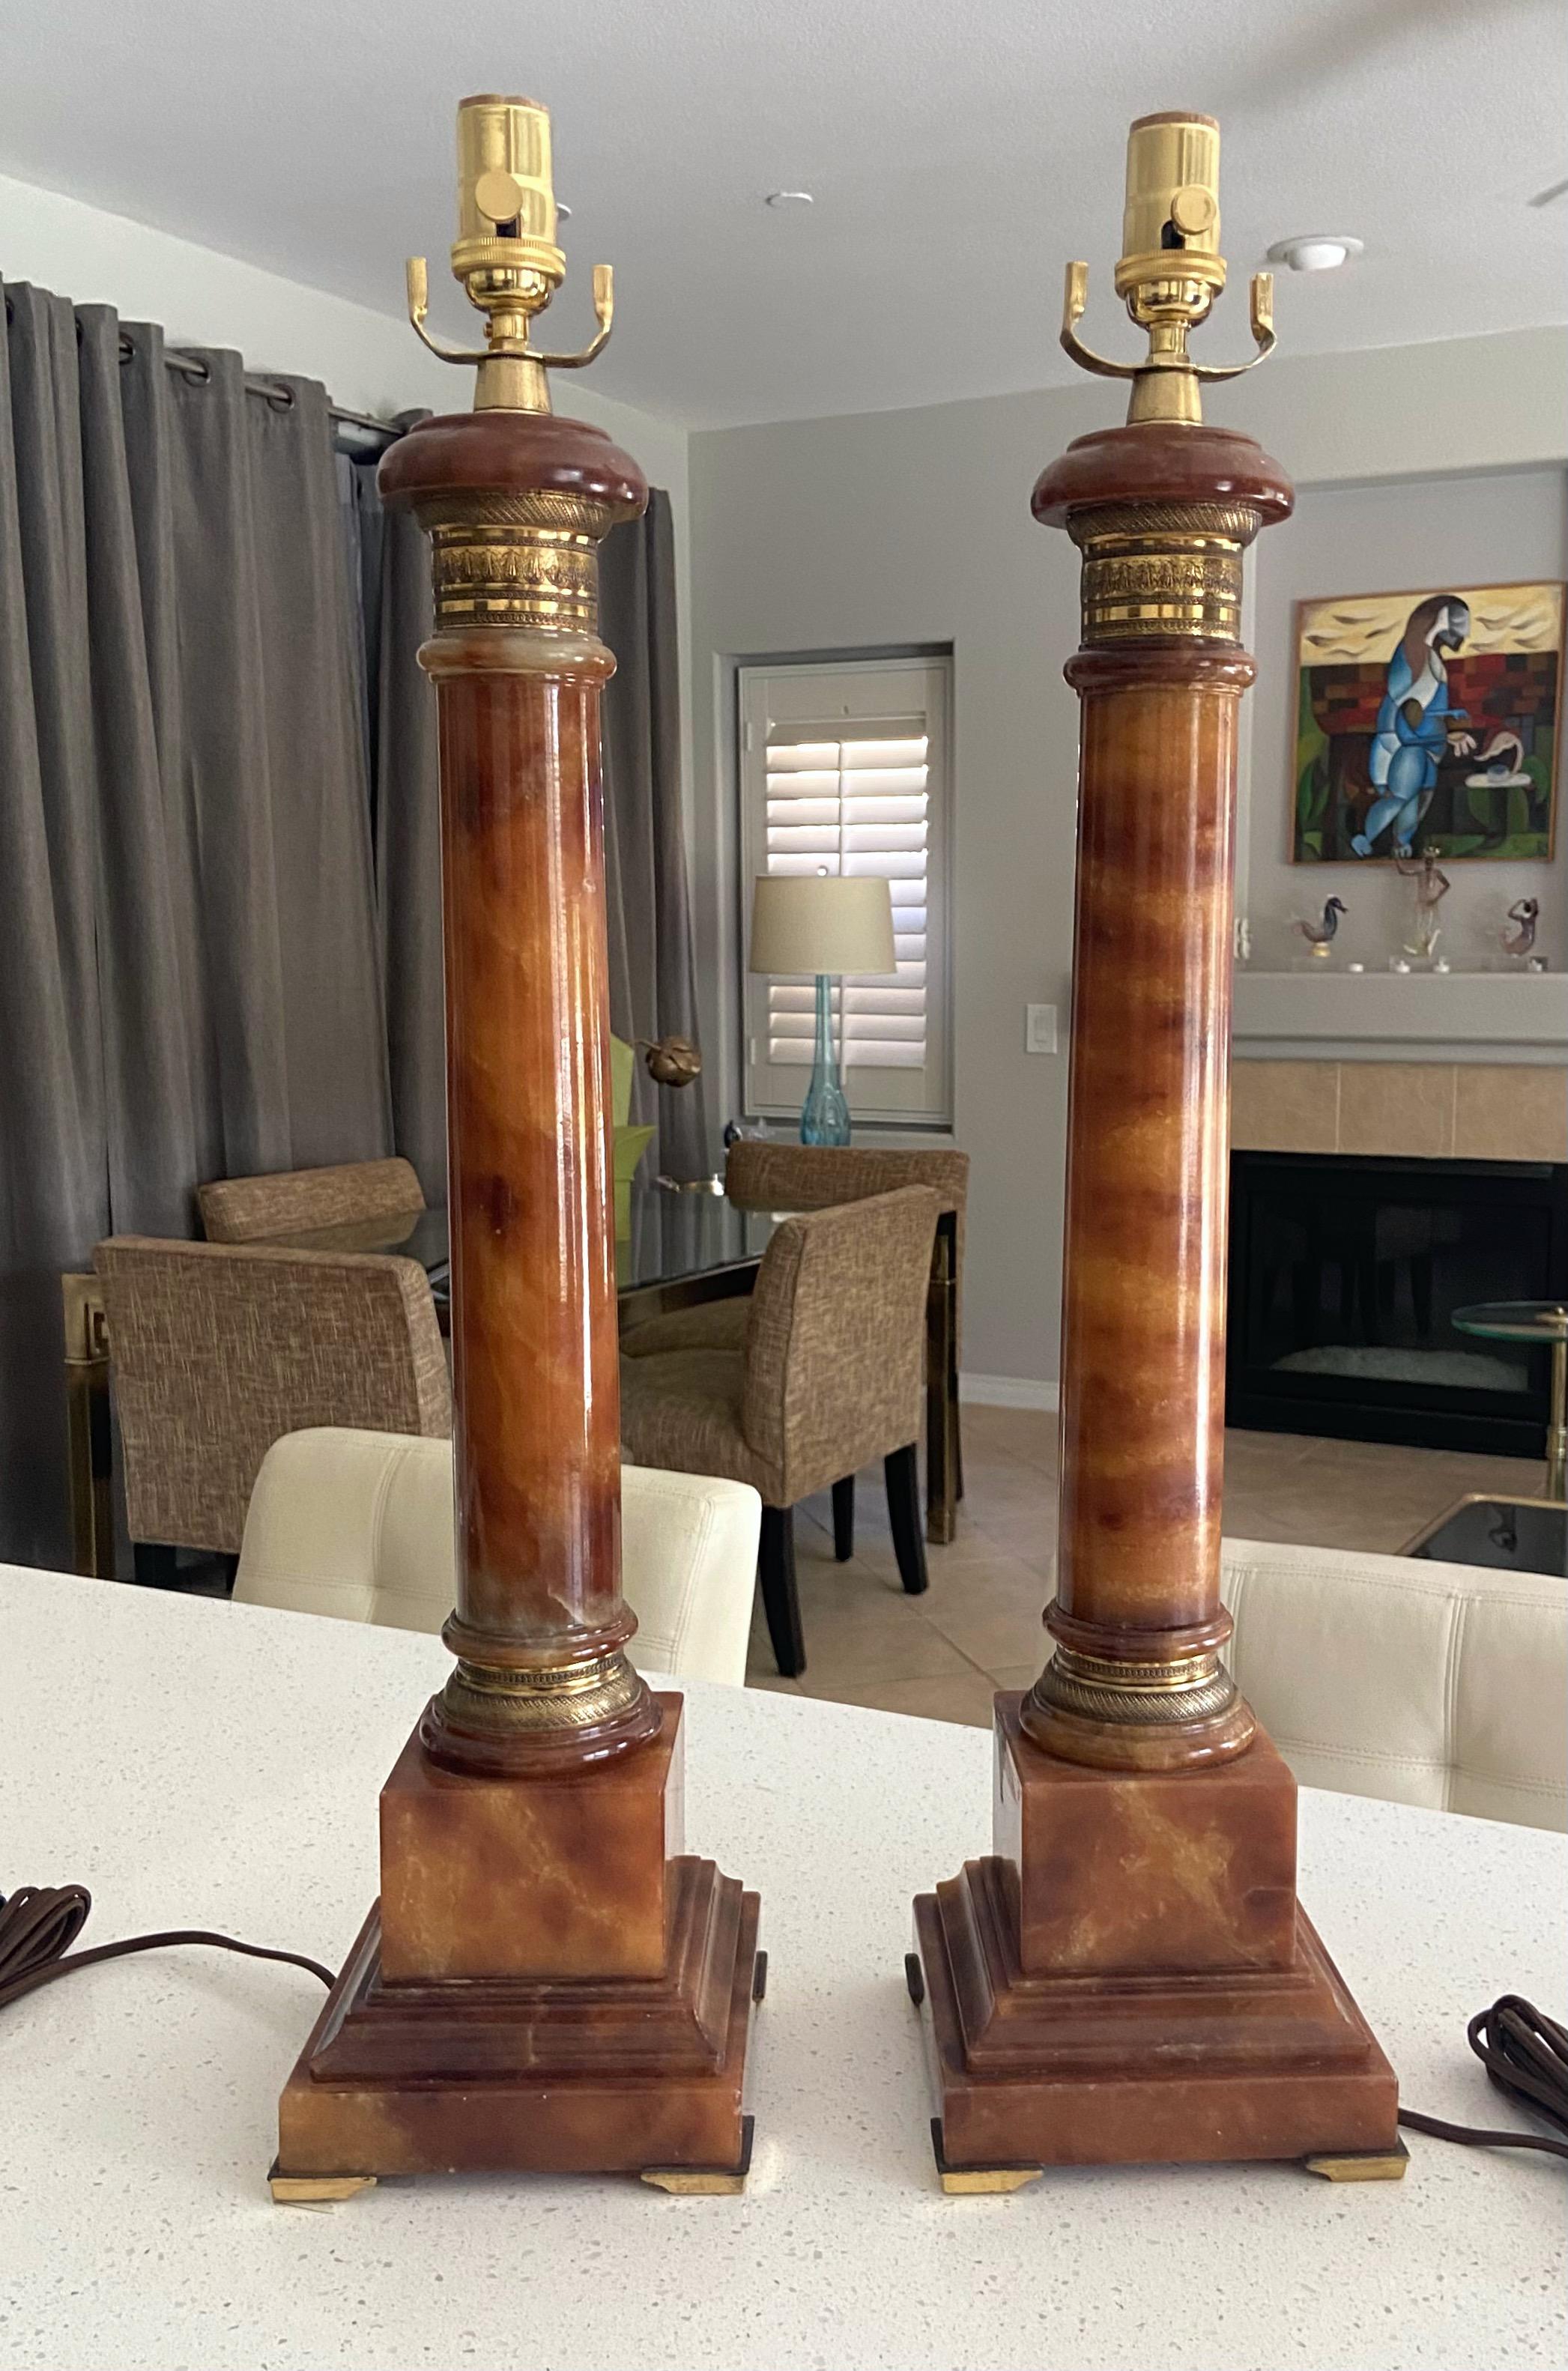 Pair of large hand carved neoclassic style column form alabaster lamps with brass mounted fittings. The color of the stone is rich amber with lots of color variation and veining. Manufactured by renowned lighting company Marbro (label was on the